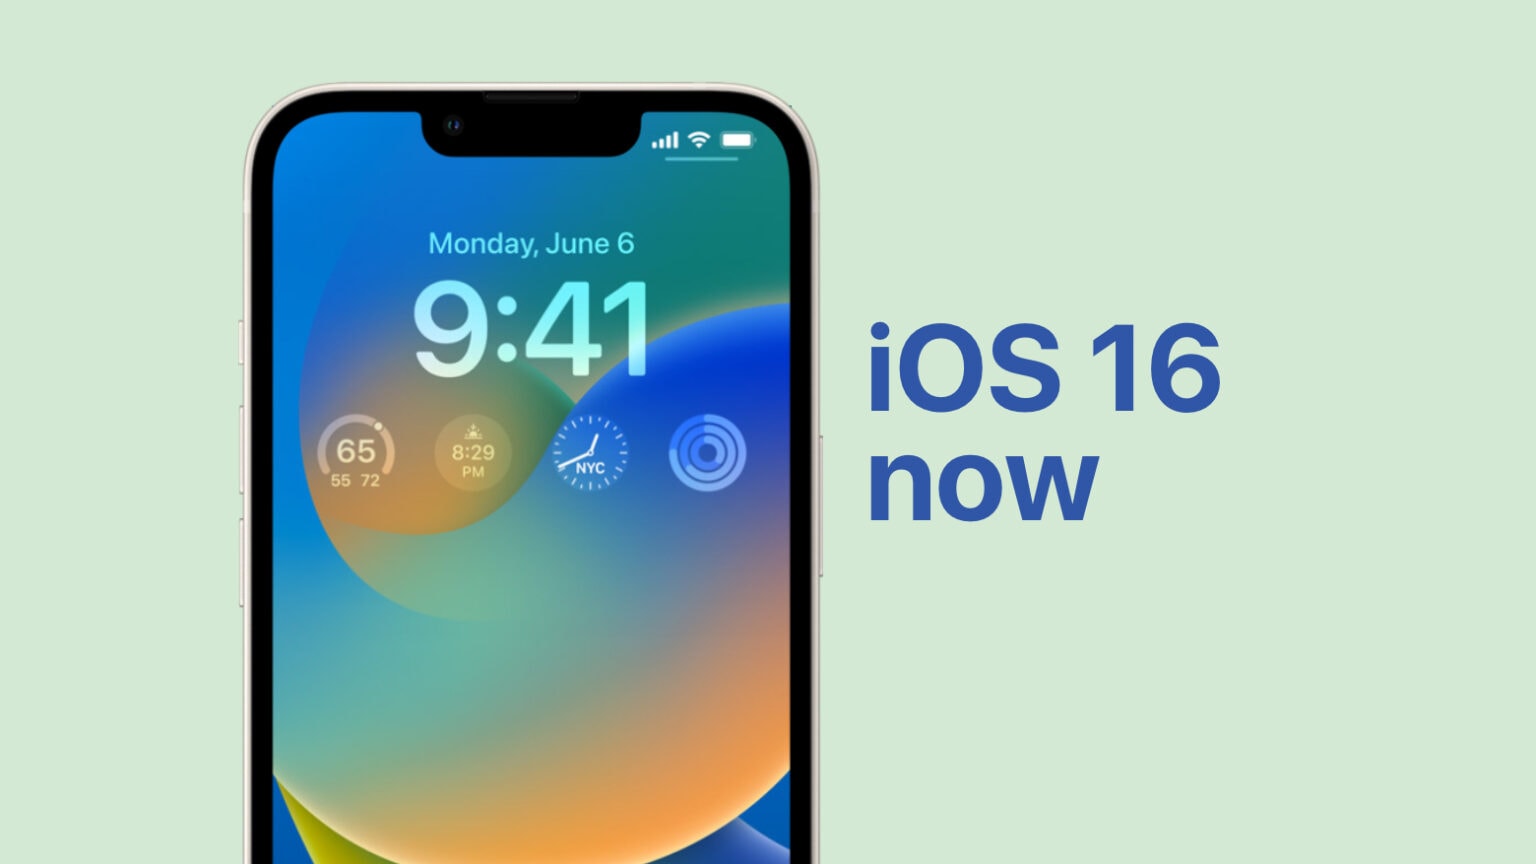 No need to wait: How to install iOS 16 now